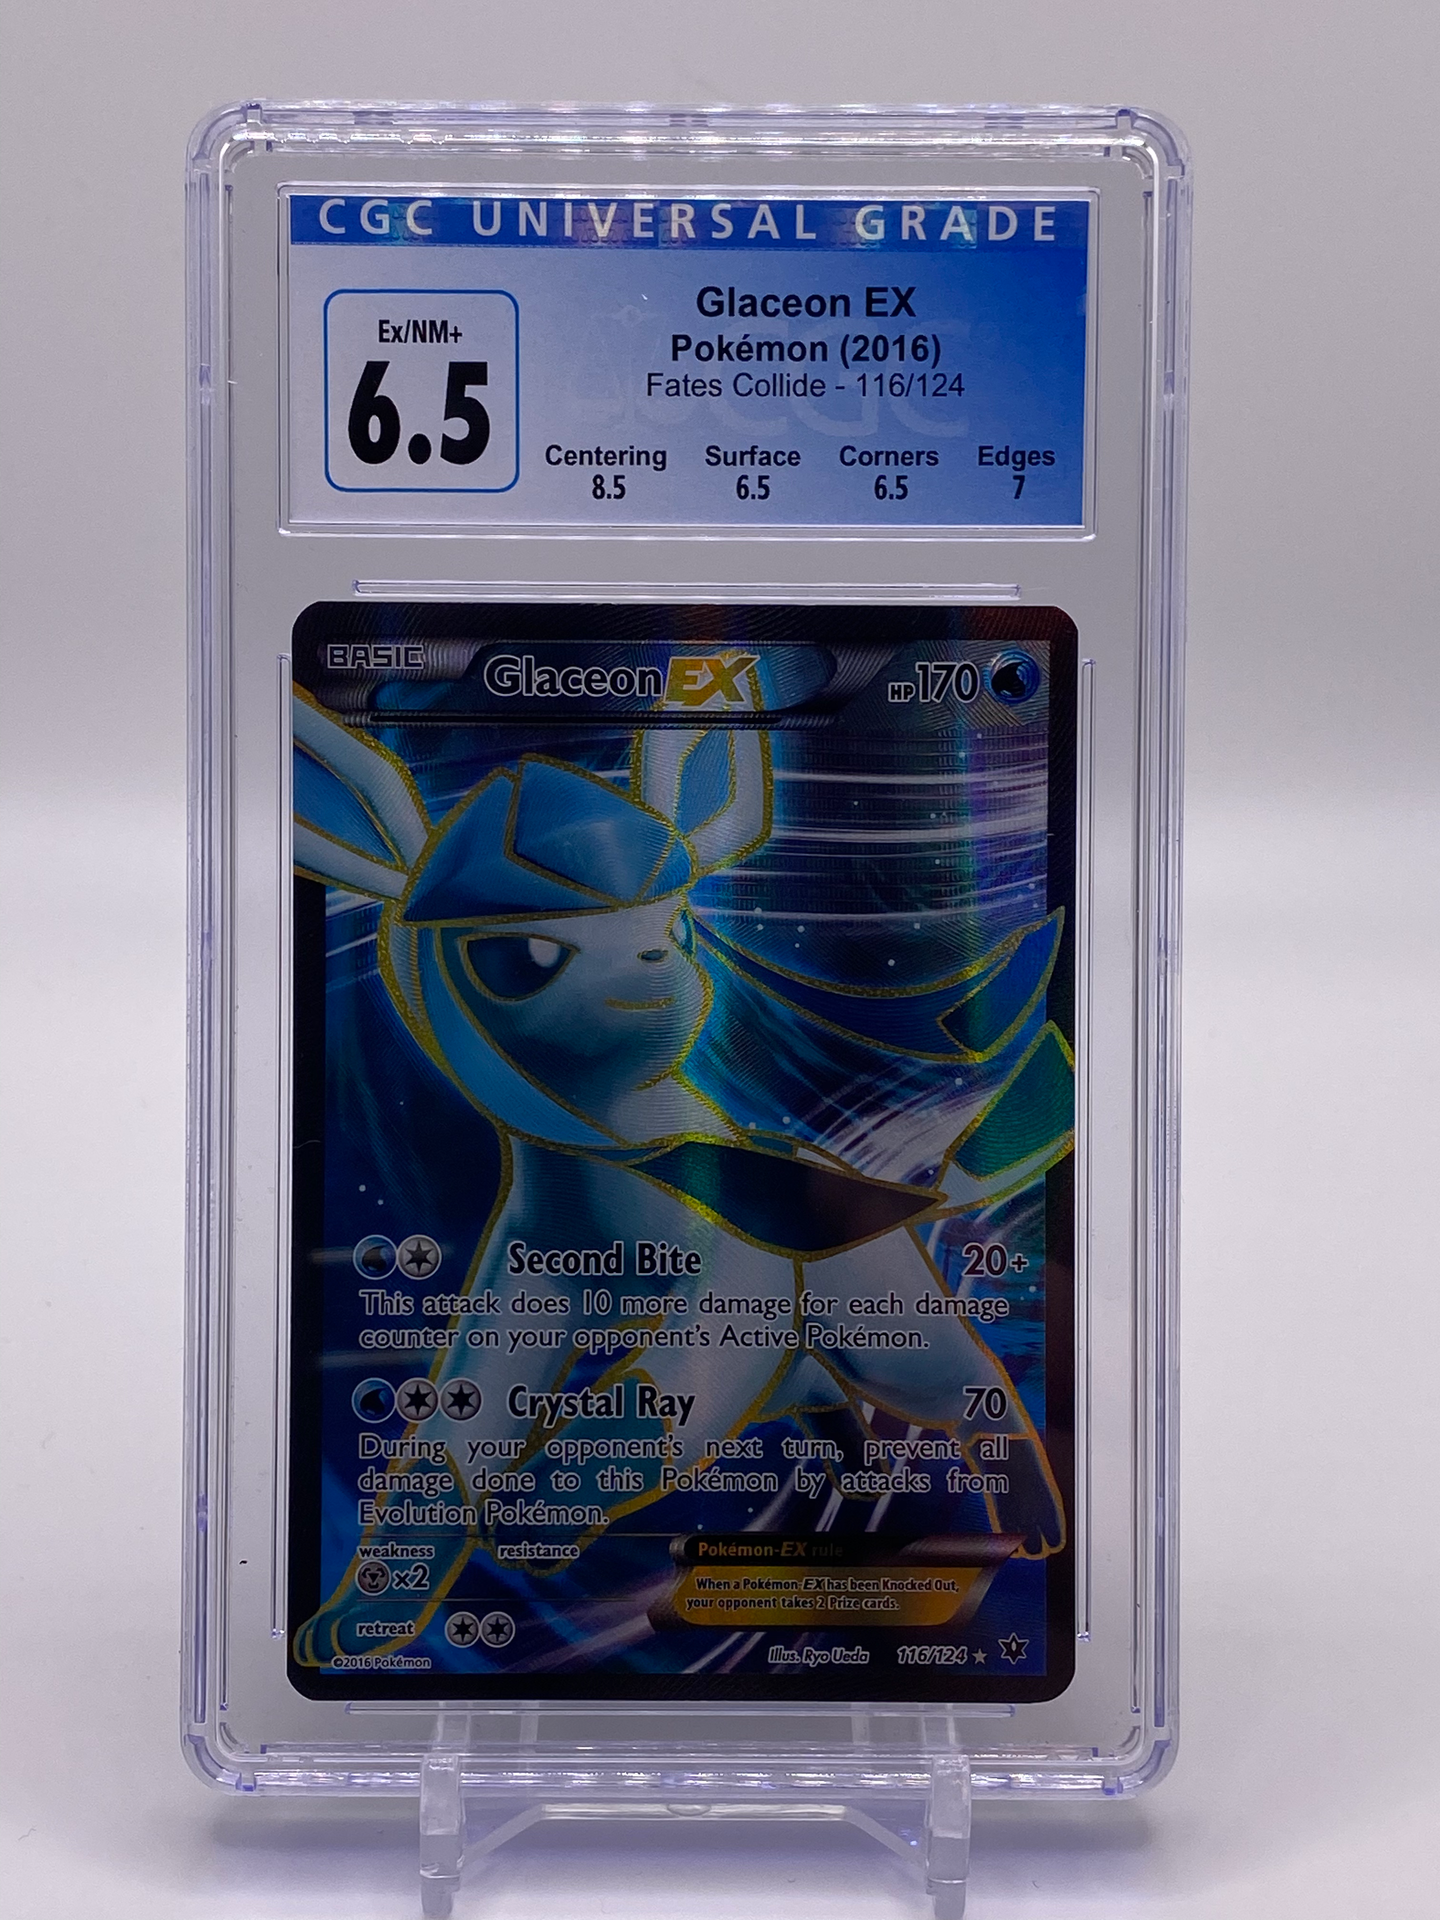 CGC 6.5 Glaceon EX Full Art (Graded Card)